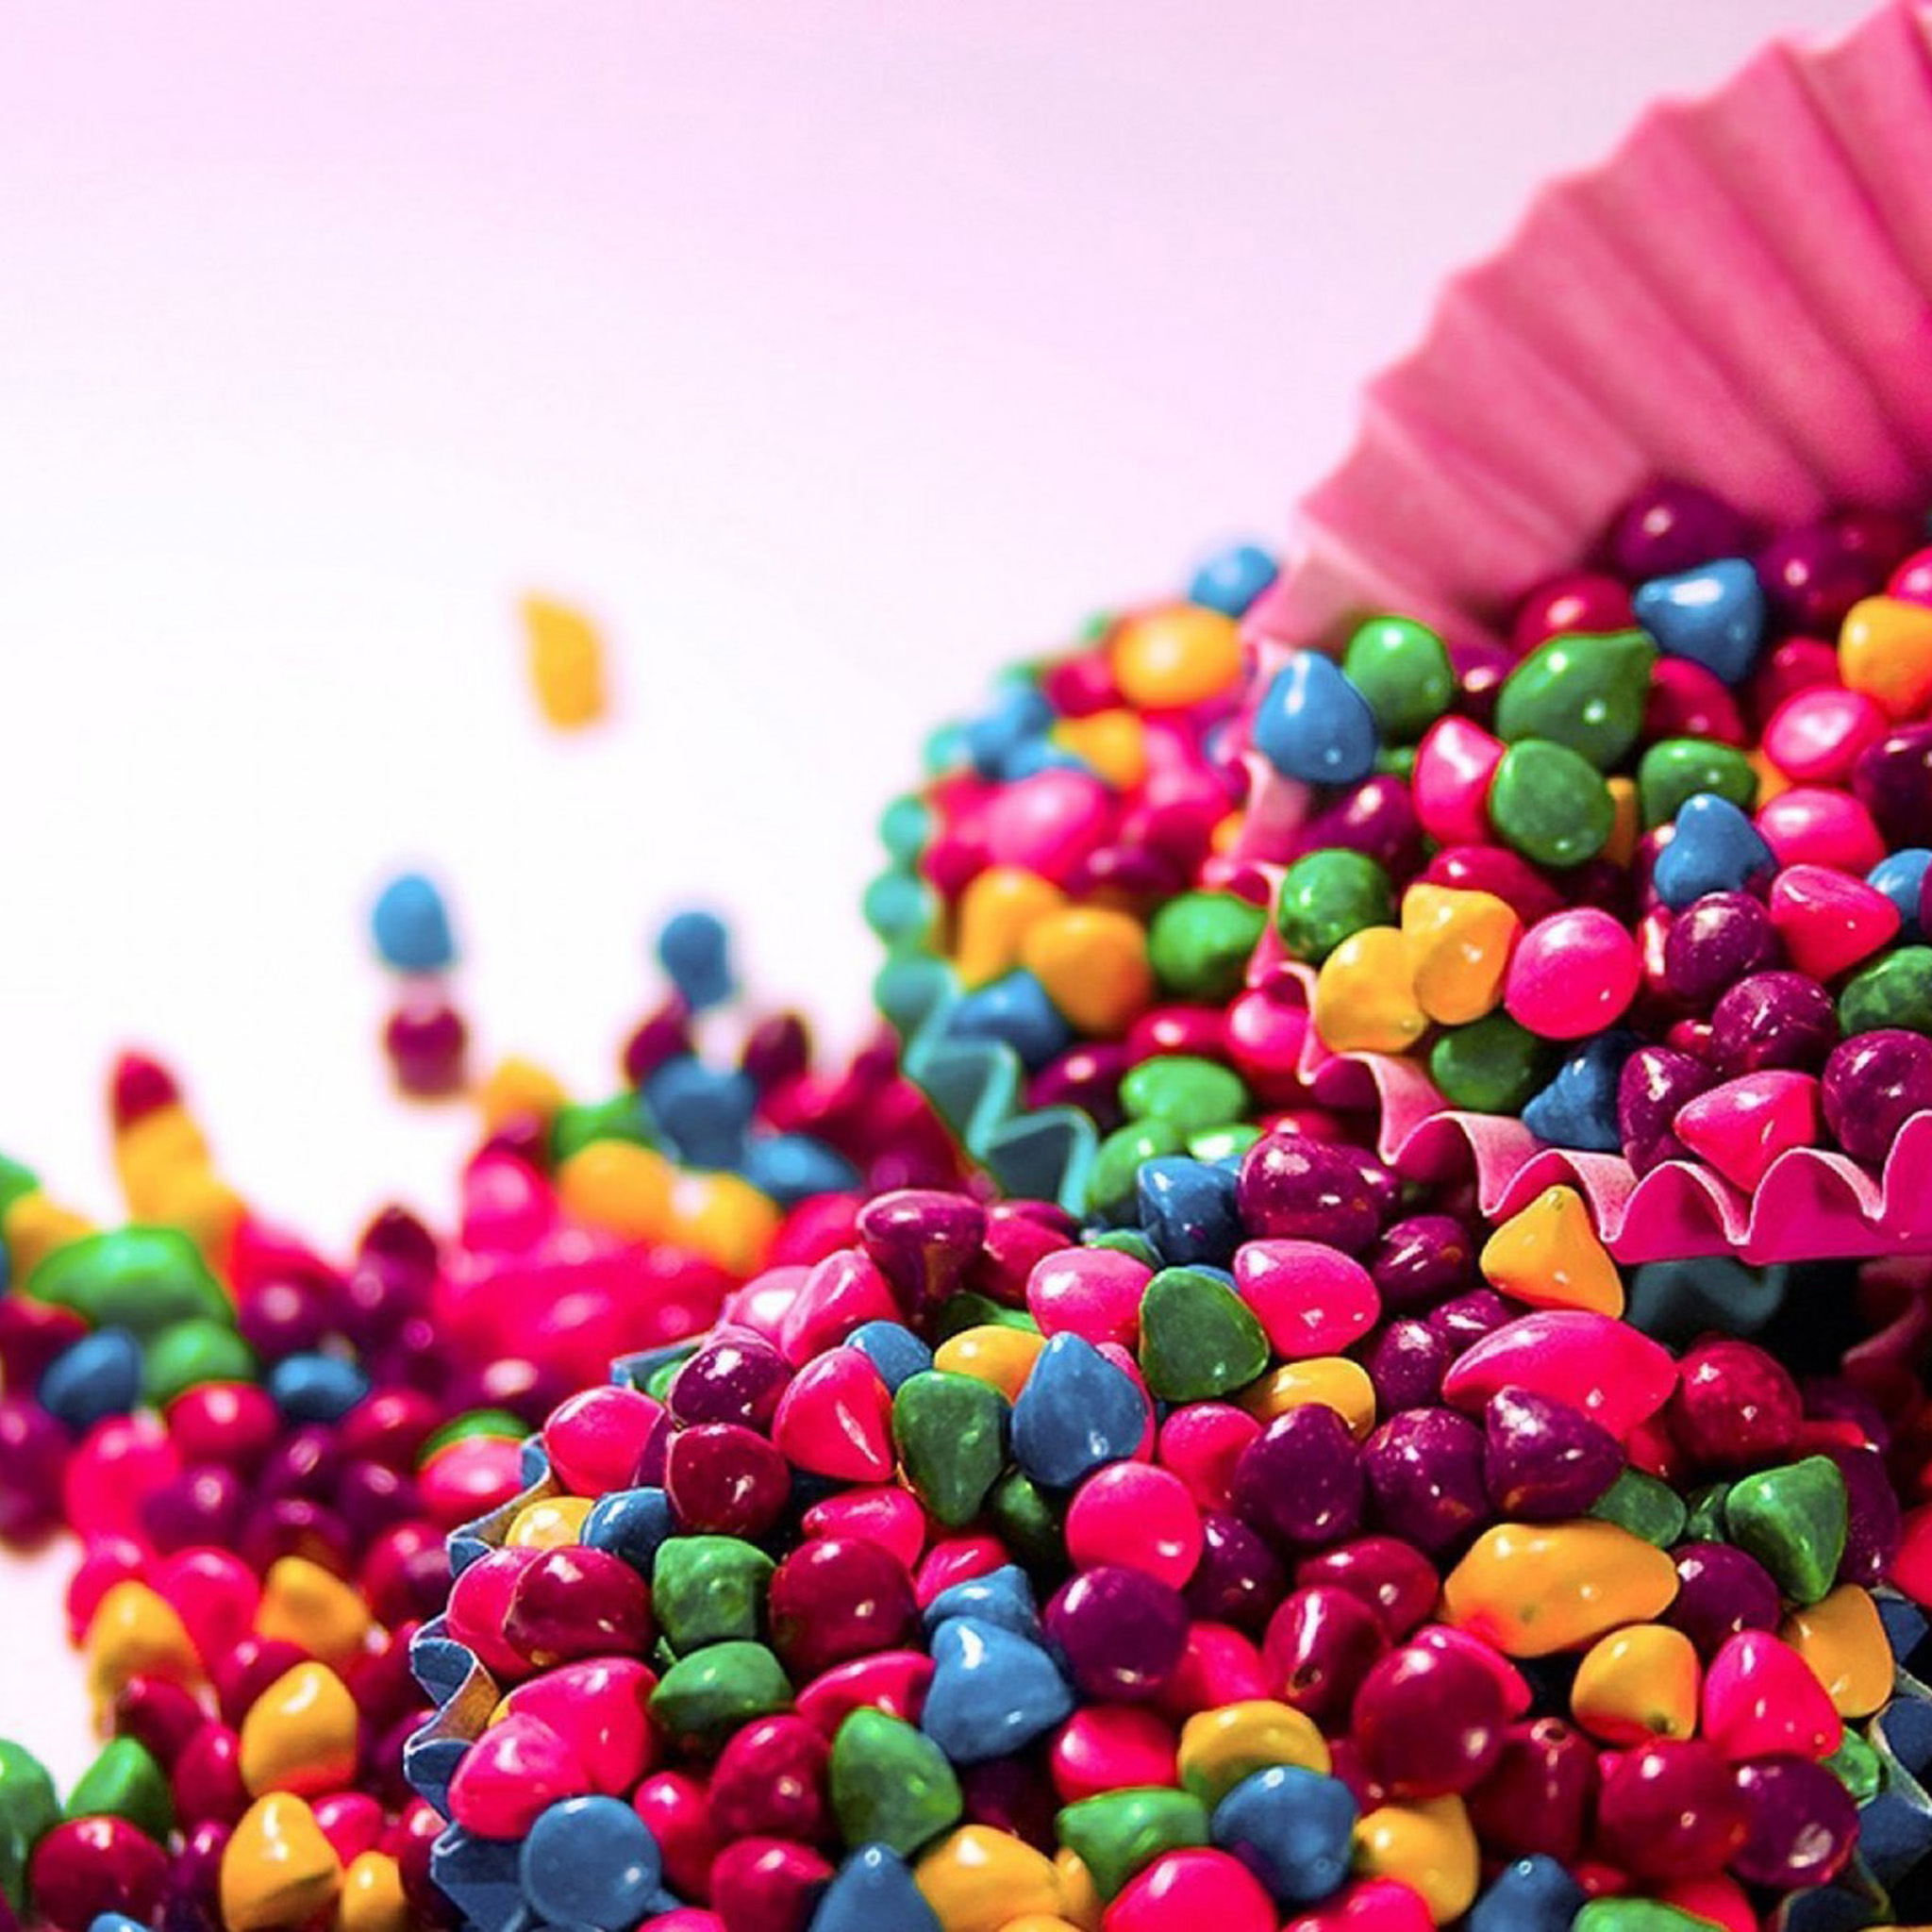 Skittles Wallpaper For iPhone Galleryhip The